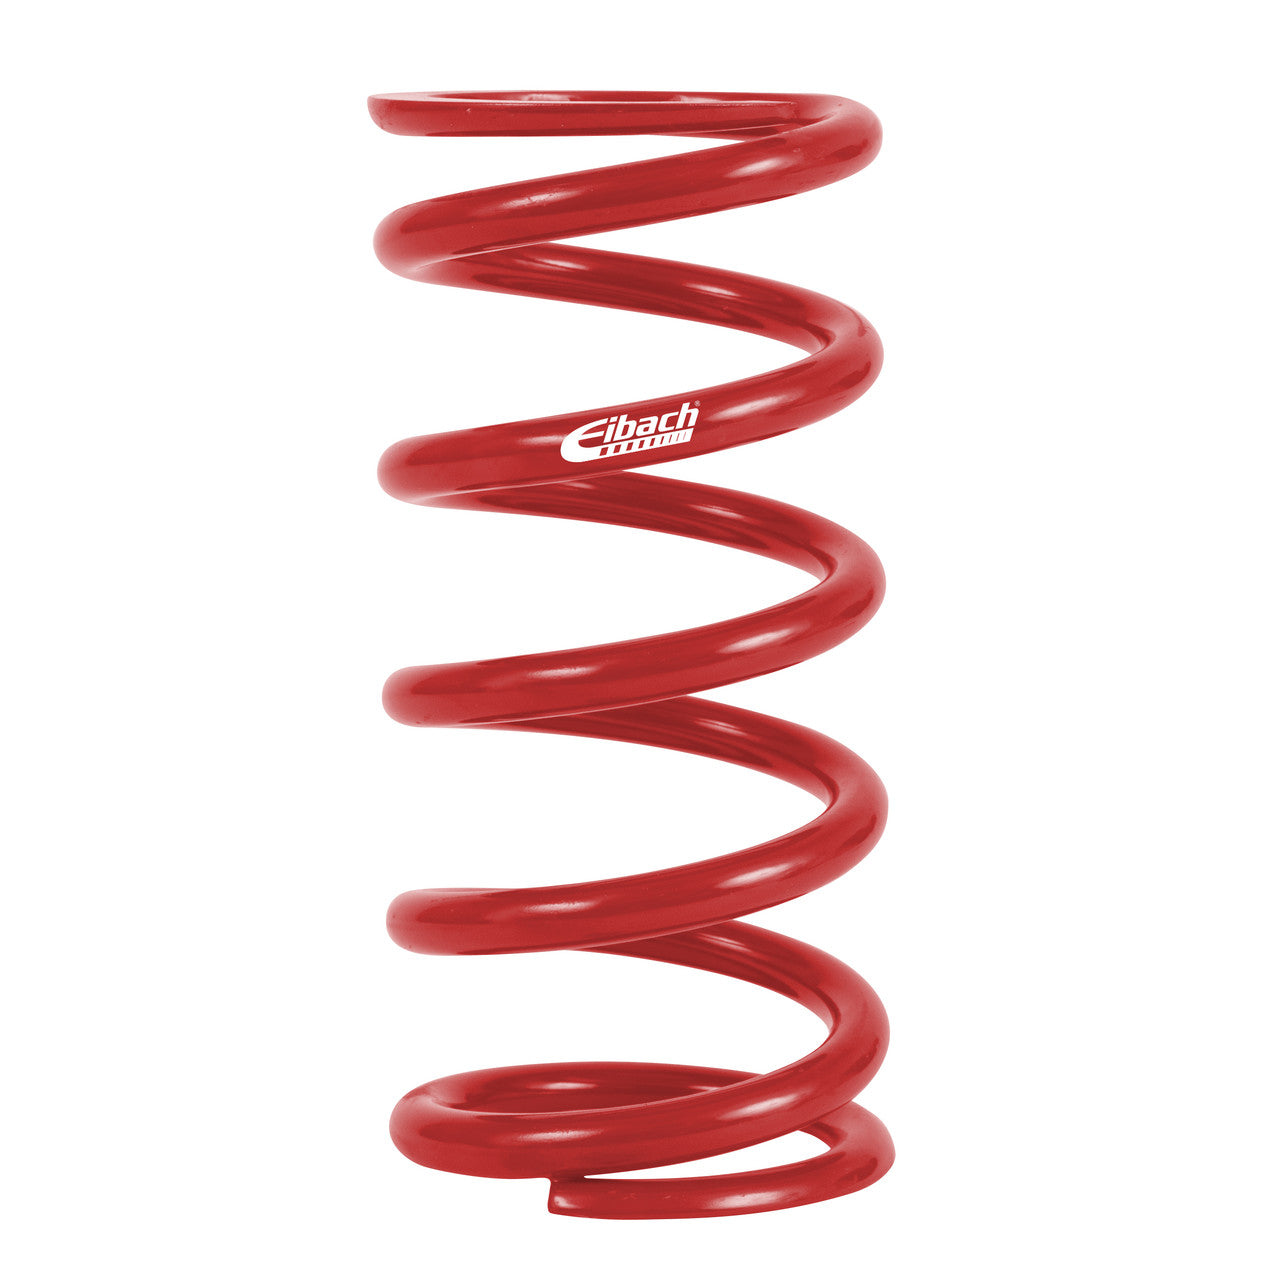 Eibach Metric Coilover Spring - 65MM I.D. 250-065-T070